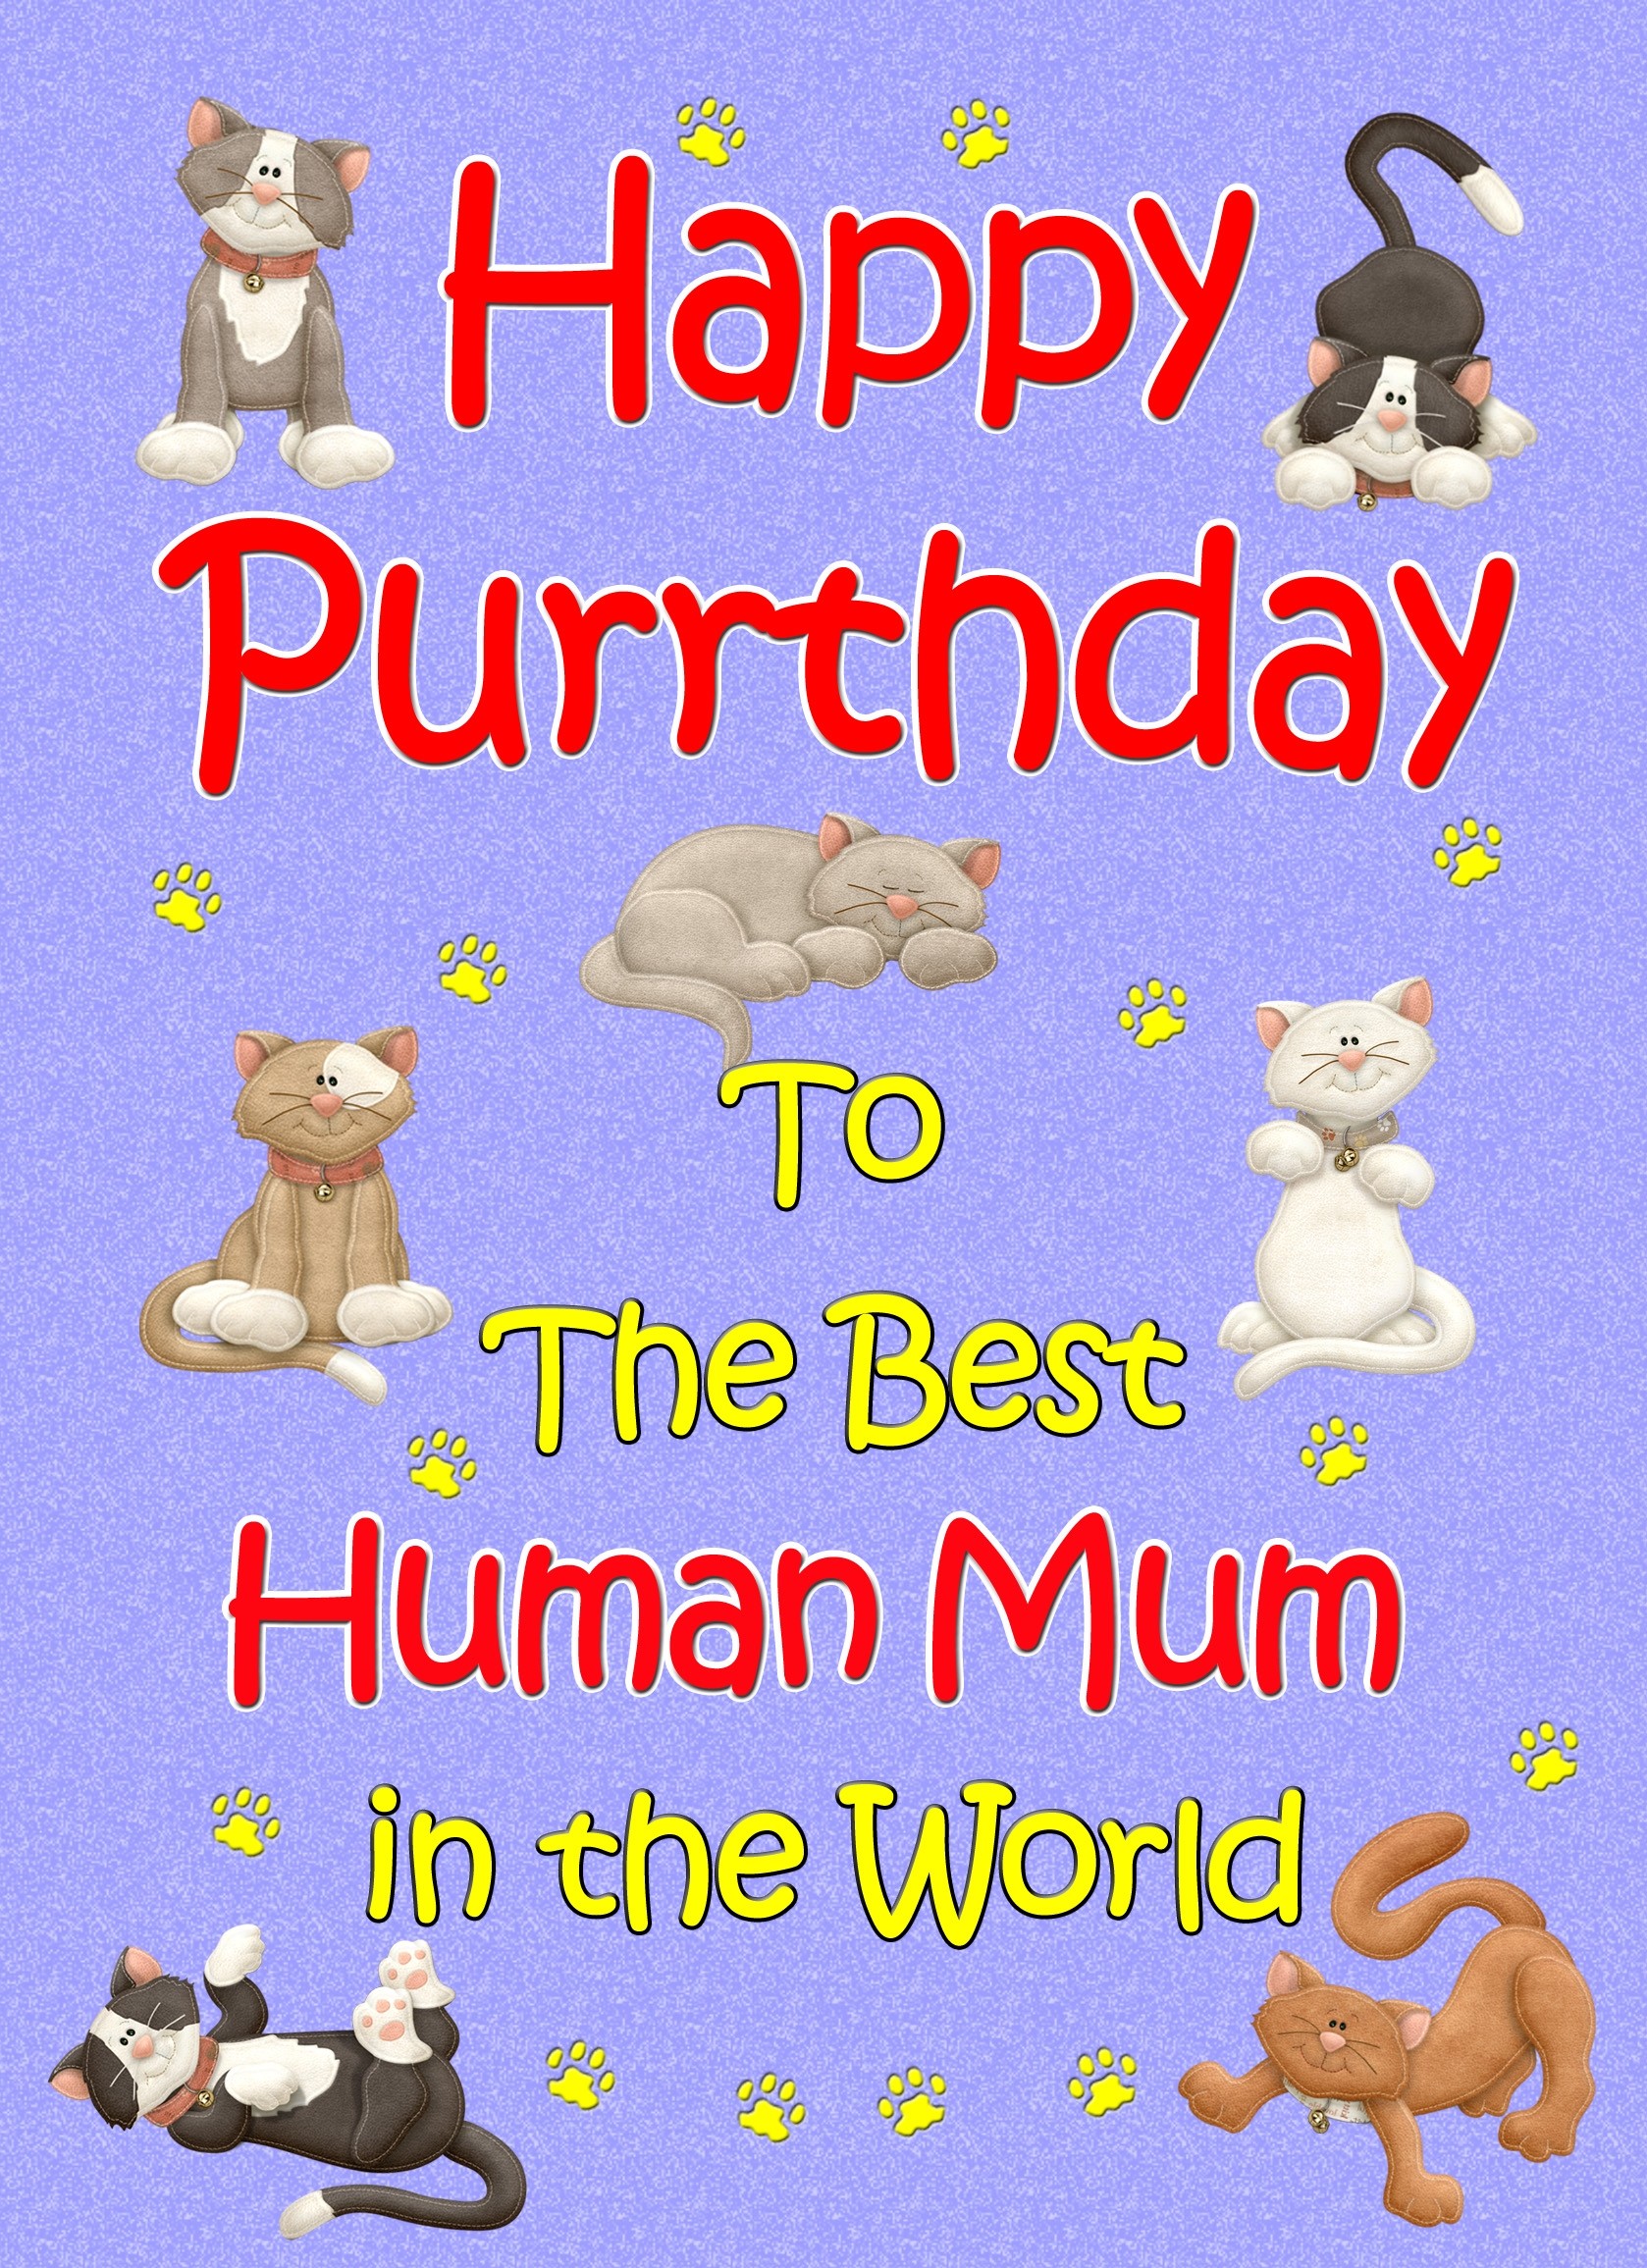 From The Cat Birthday Card (Lilac, Human Mum, Happy Purrthday)